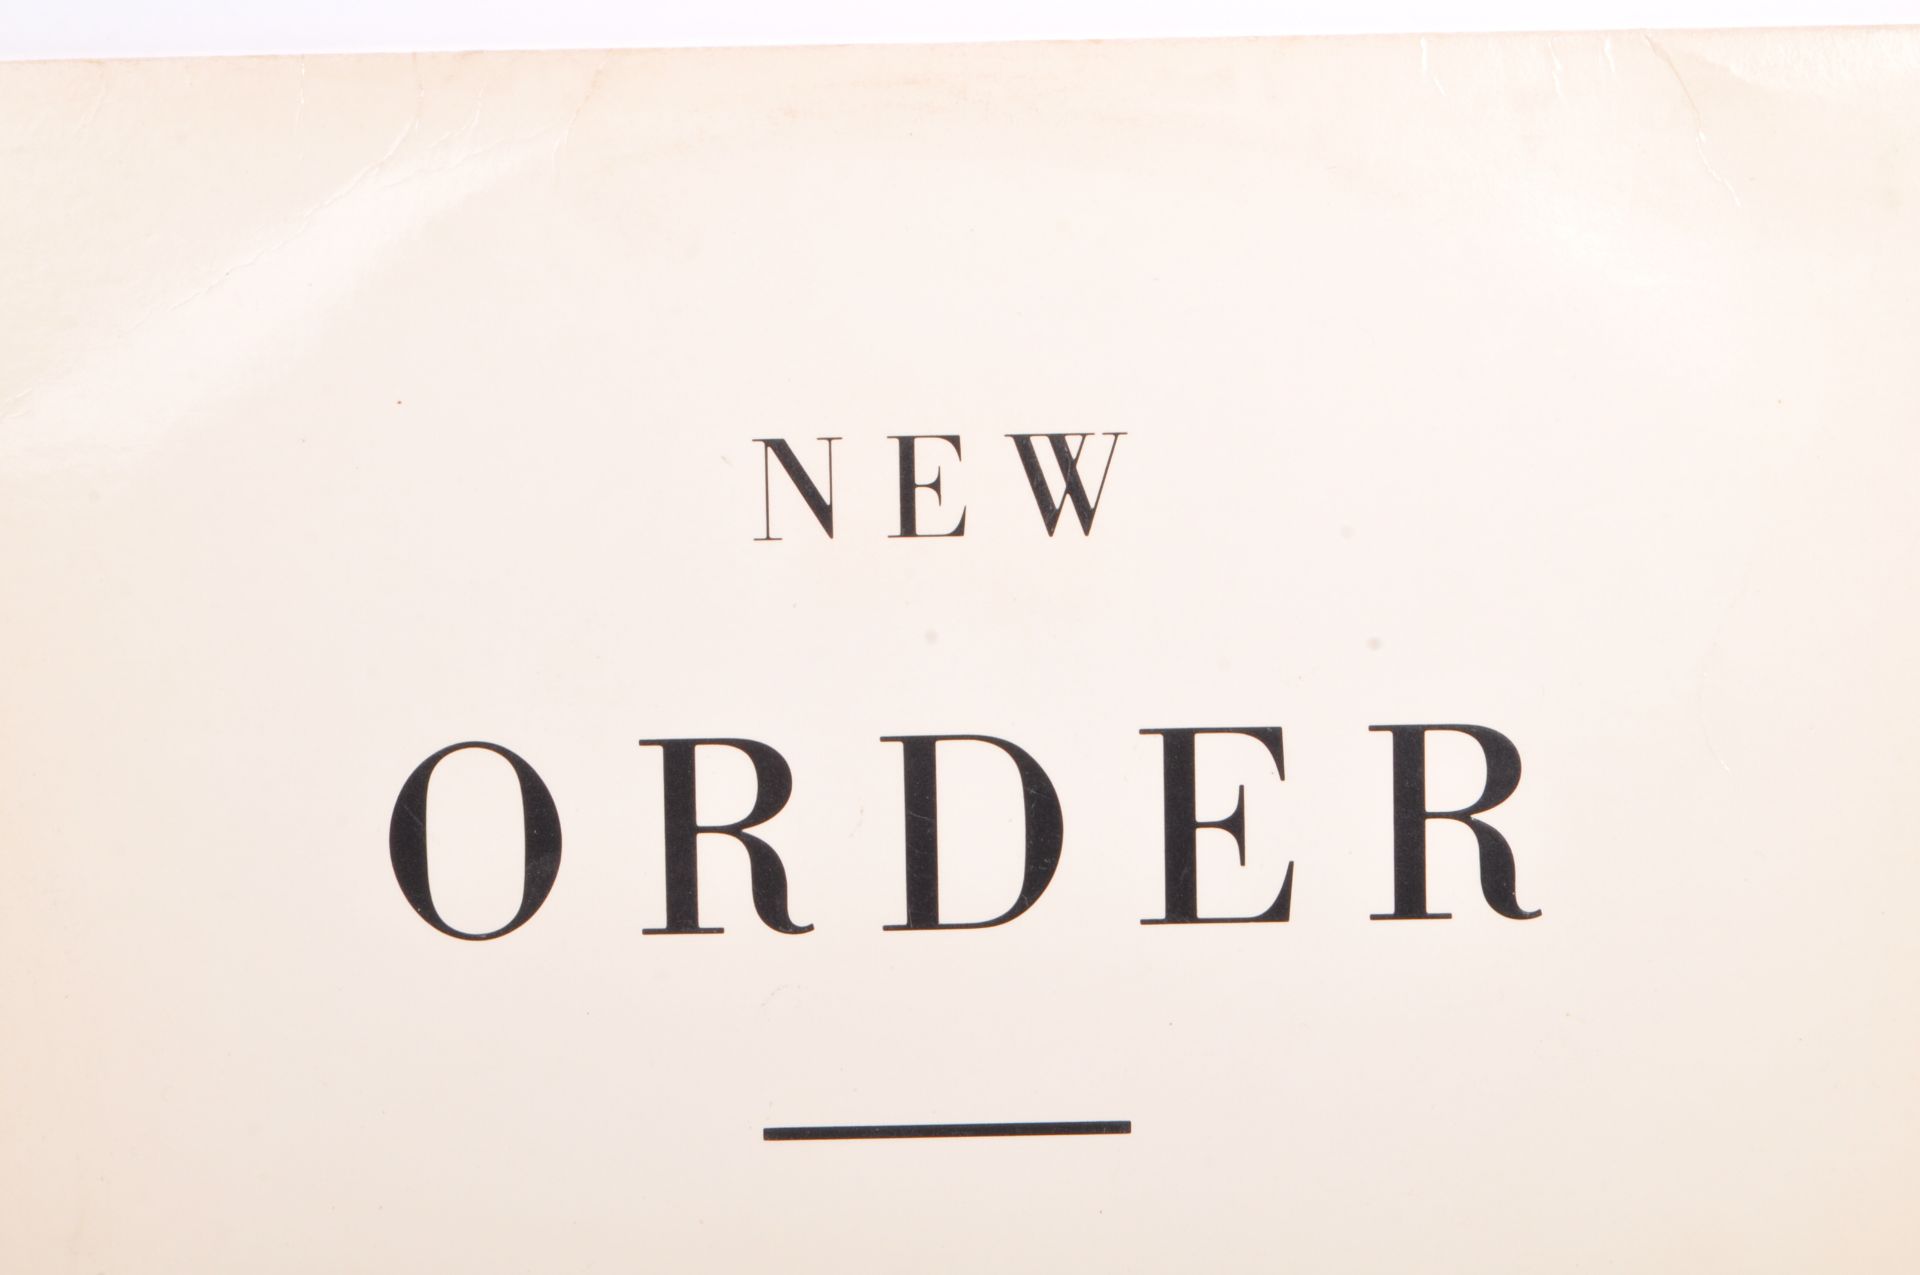 1987 NEW ORDER SUBSTANCE DOUBLE RECORD VINYL SET - Image 2 of 5